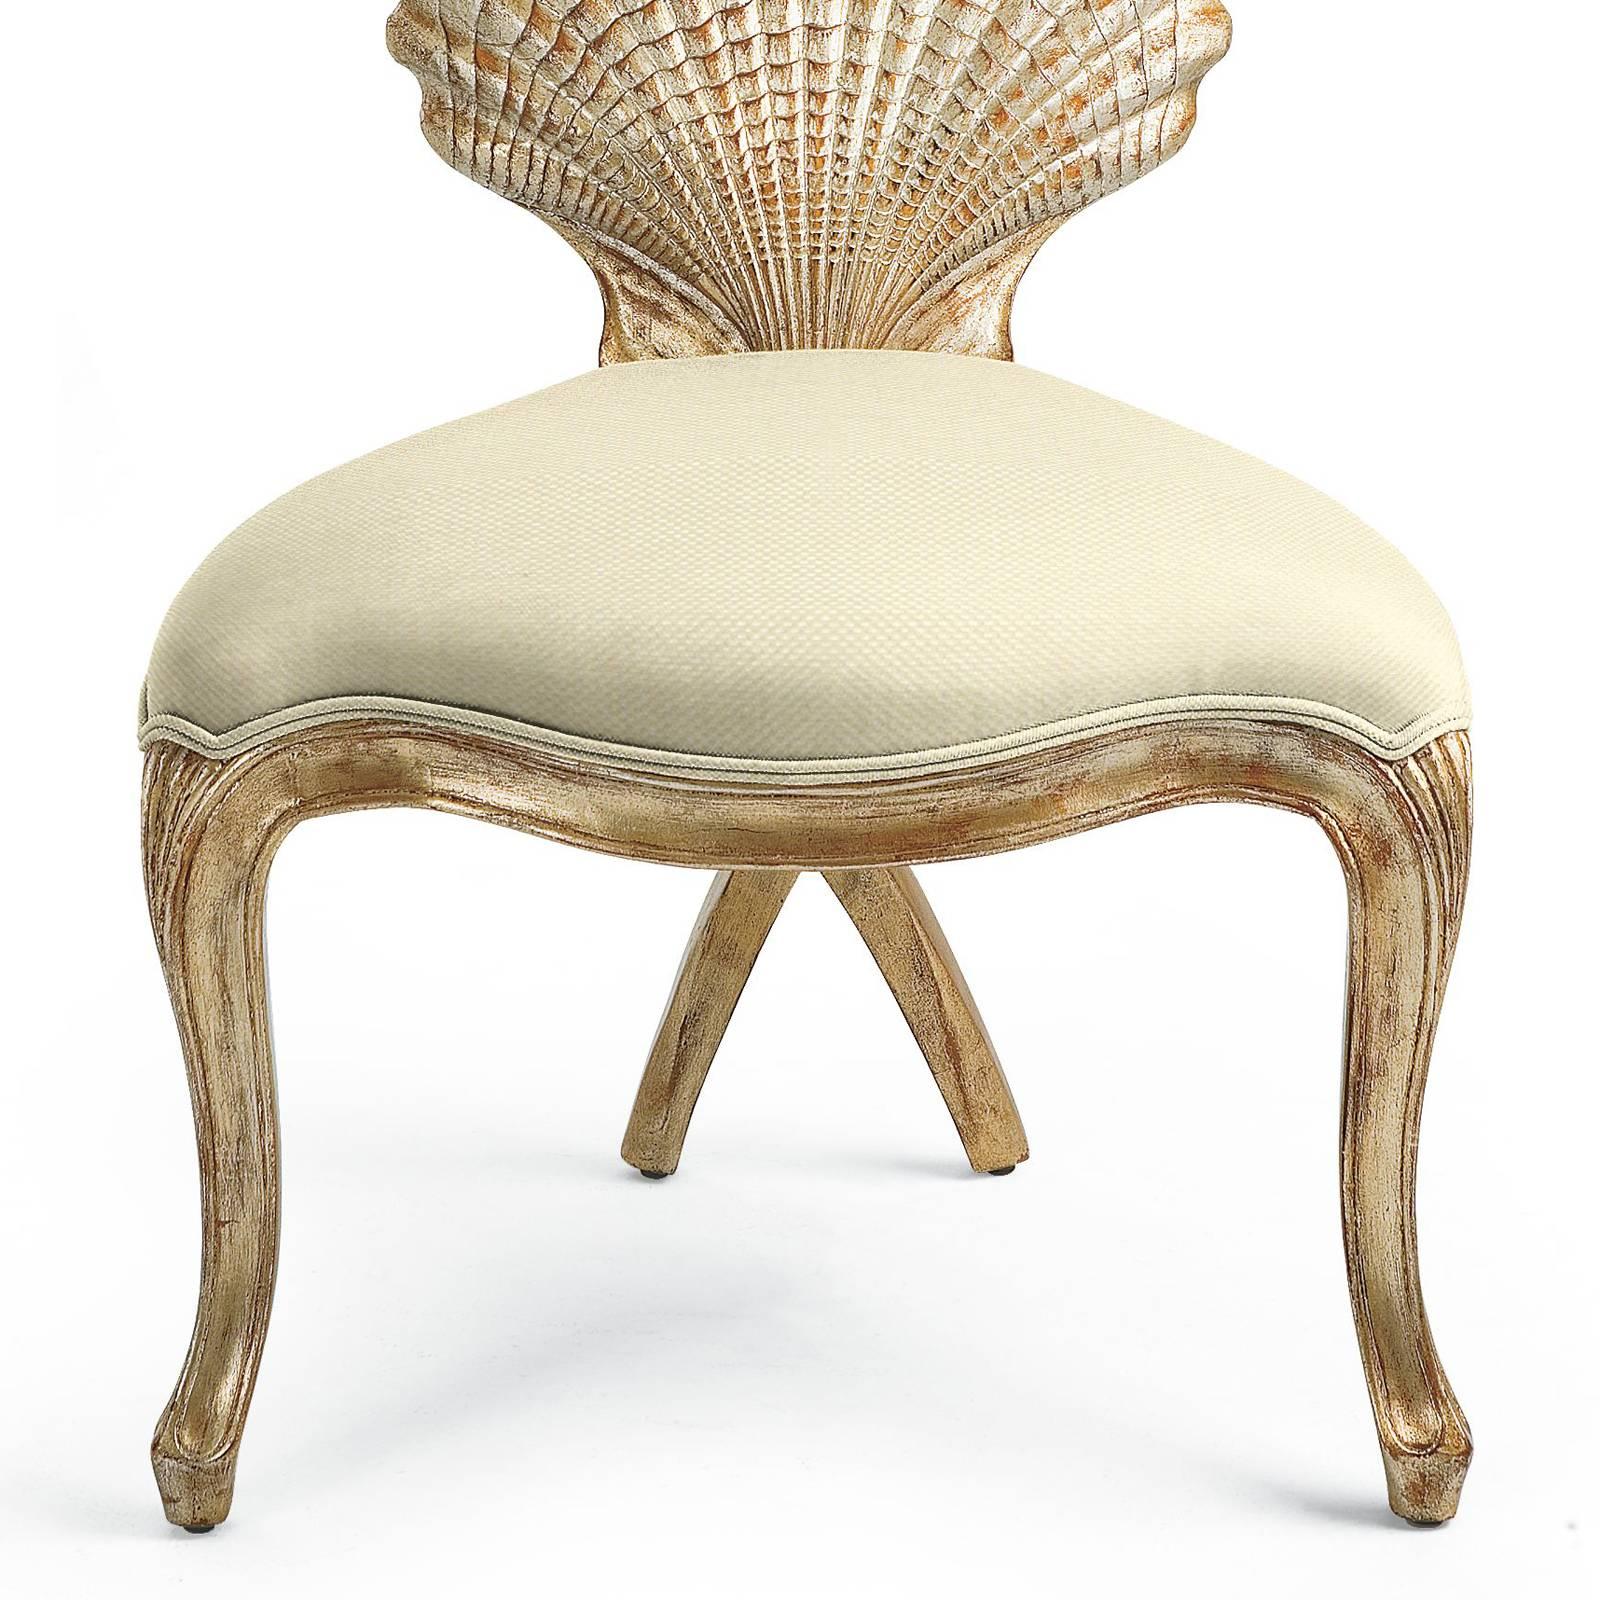 English Gold Shell Chair in Solid Hand-Carved Wood Silver Gilt Painting 